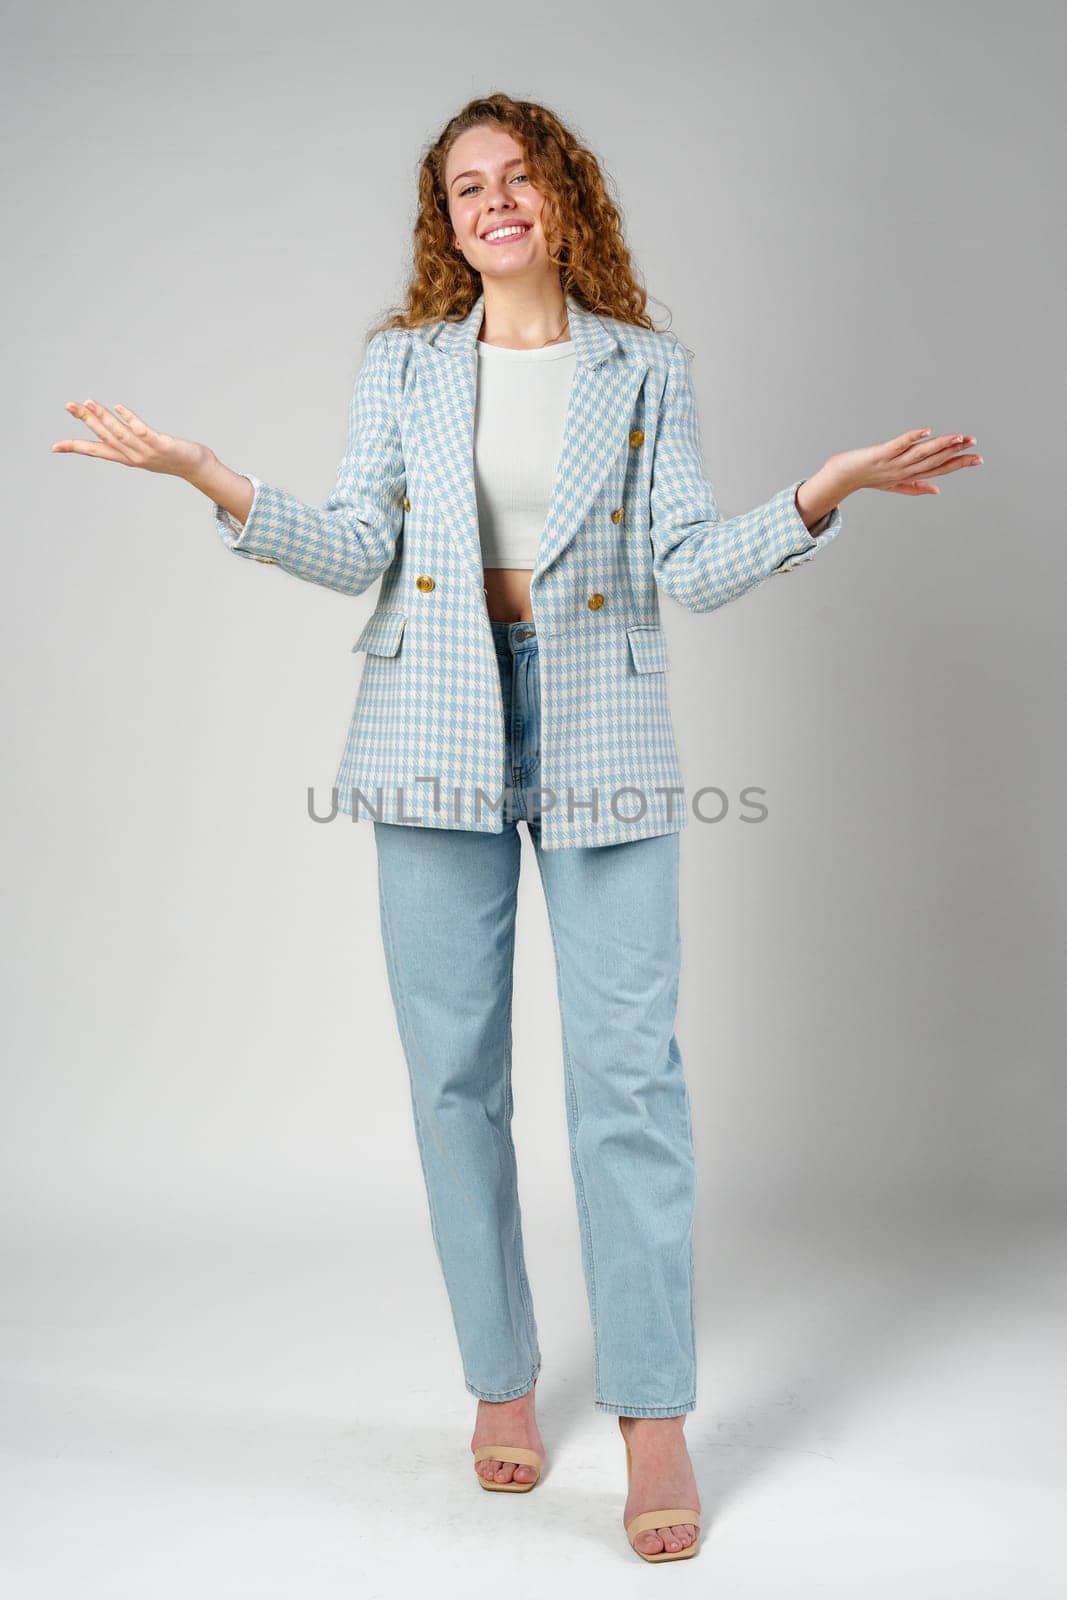 Woman in Blue and White Checkered Blazer Holding Out Arms close up